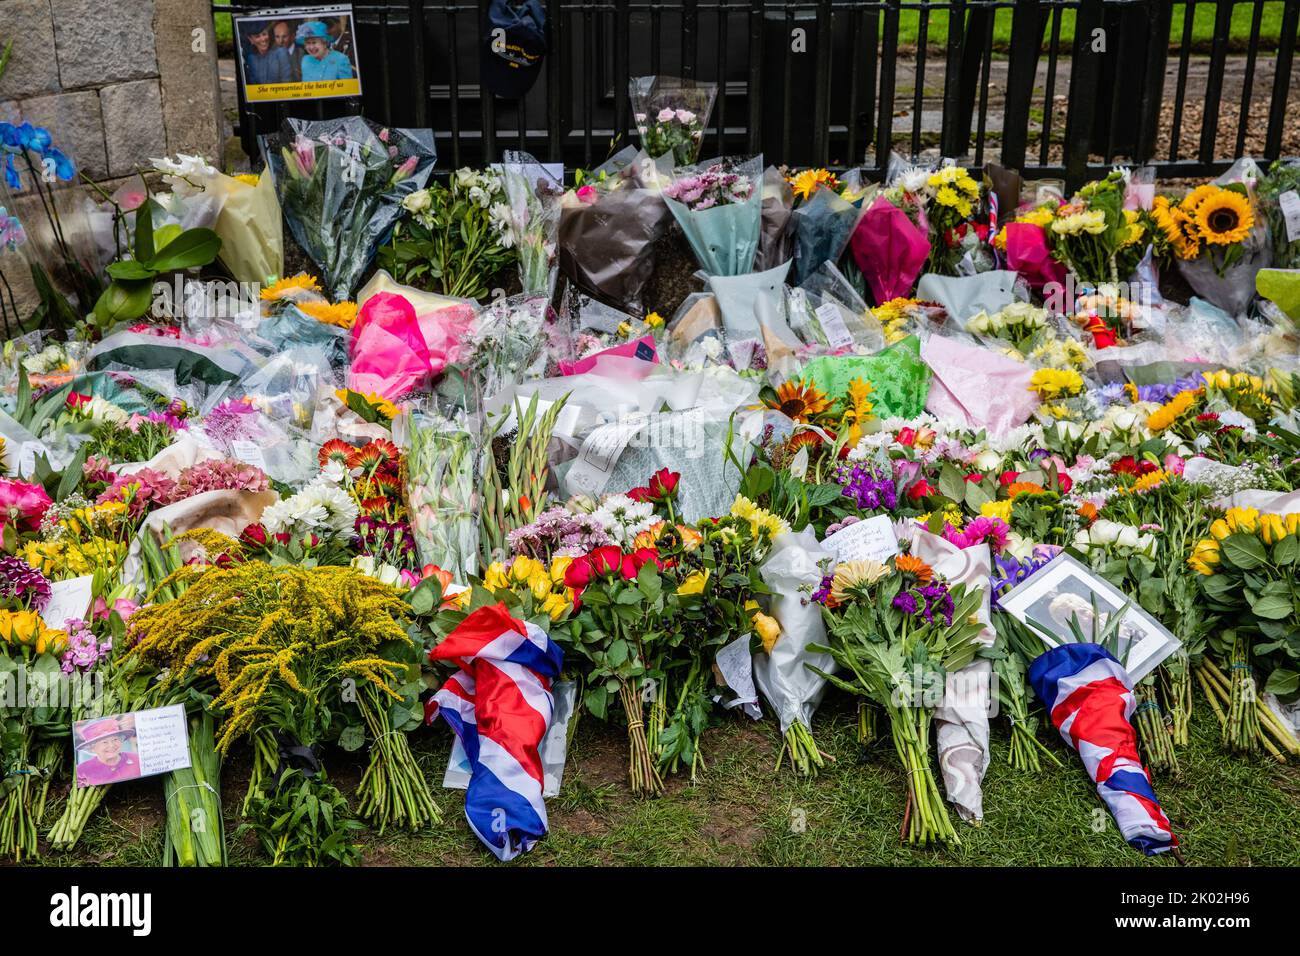 Windsor, UK. 9th September, 2022. Floral tributes are displayed outside Cambridge Gate at Windsor Castle a day after the death of Queen Elizabeth II. Queen Elizabeth II, the UK's longest-serving monarch, died at Balmoral aged 96 after a reign lasting 70 years. Credit: Mark Kerrison/Alamy Live News Stock Photo